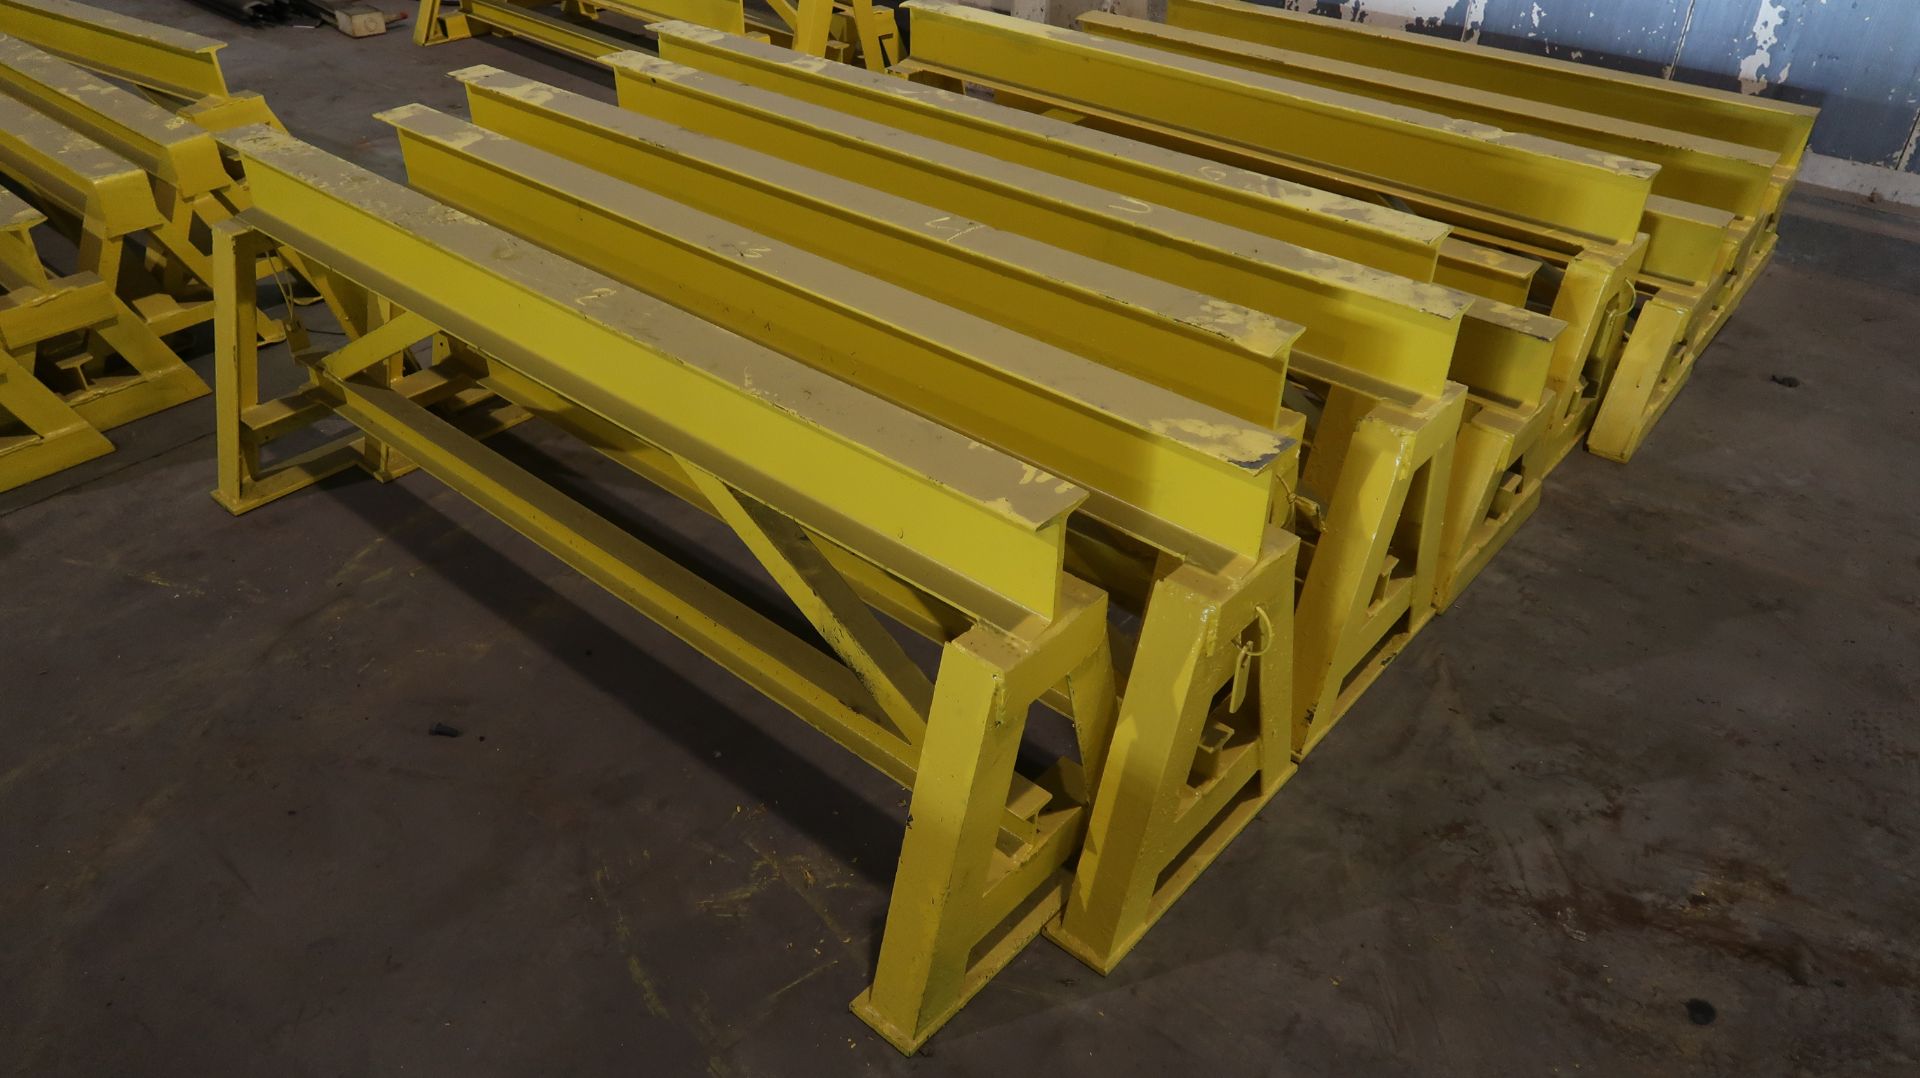 20,000lb. Die Stands 6' Length x 26" Height (Beam 3-1/2") 4 Units in Lot